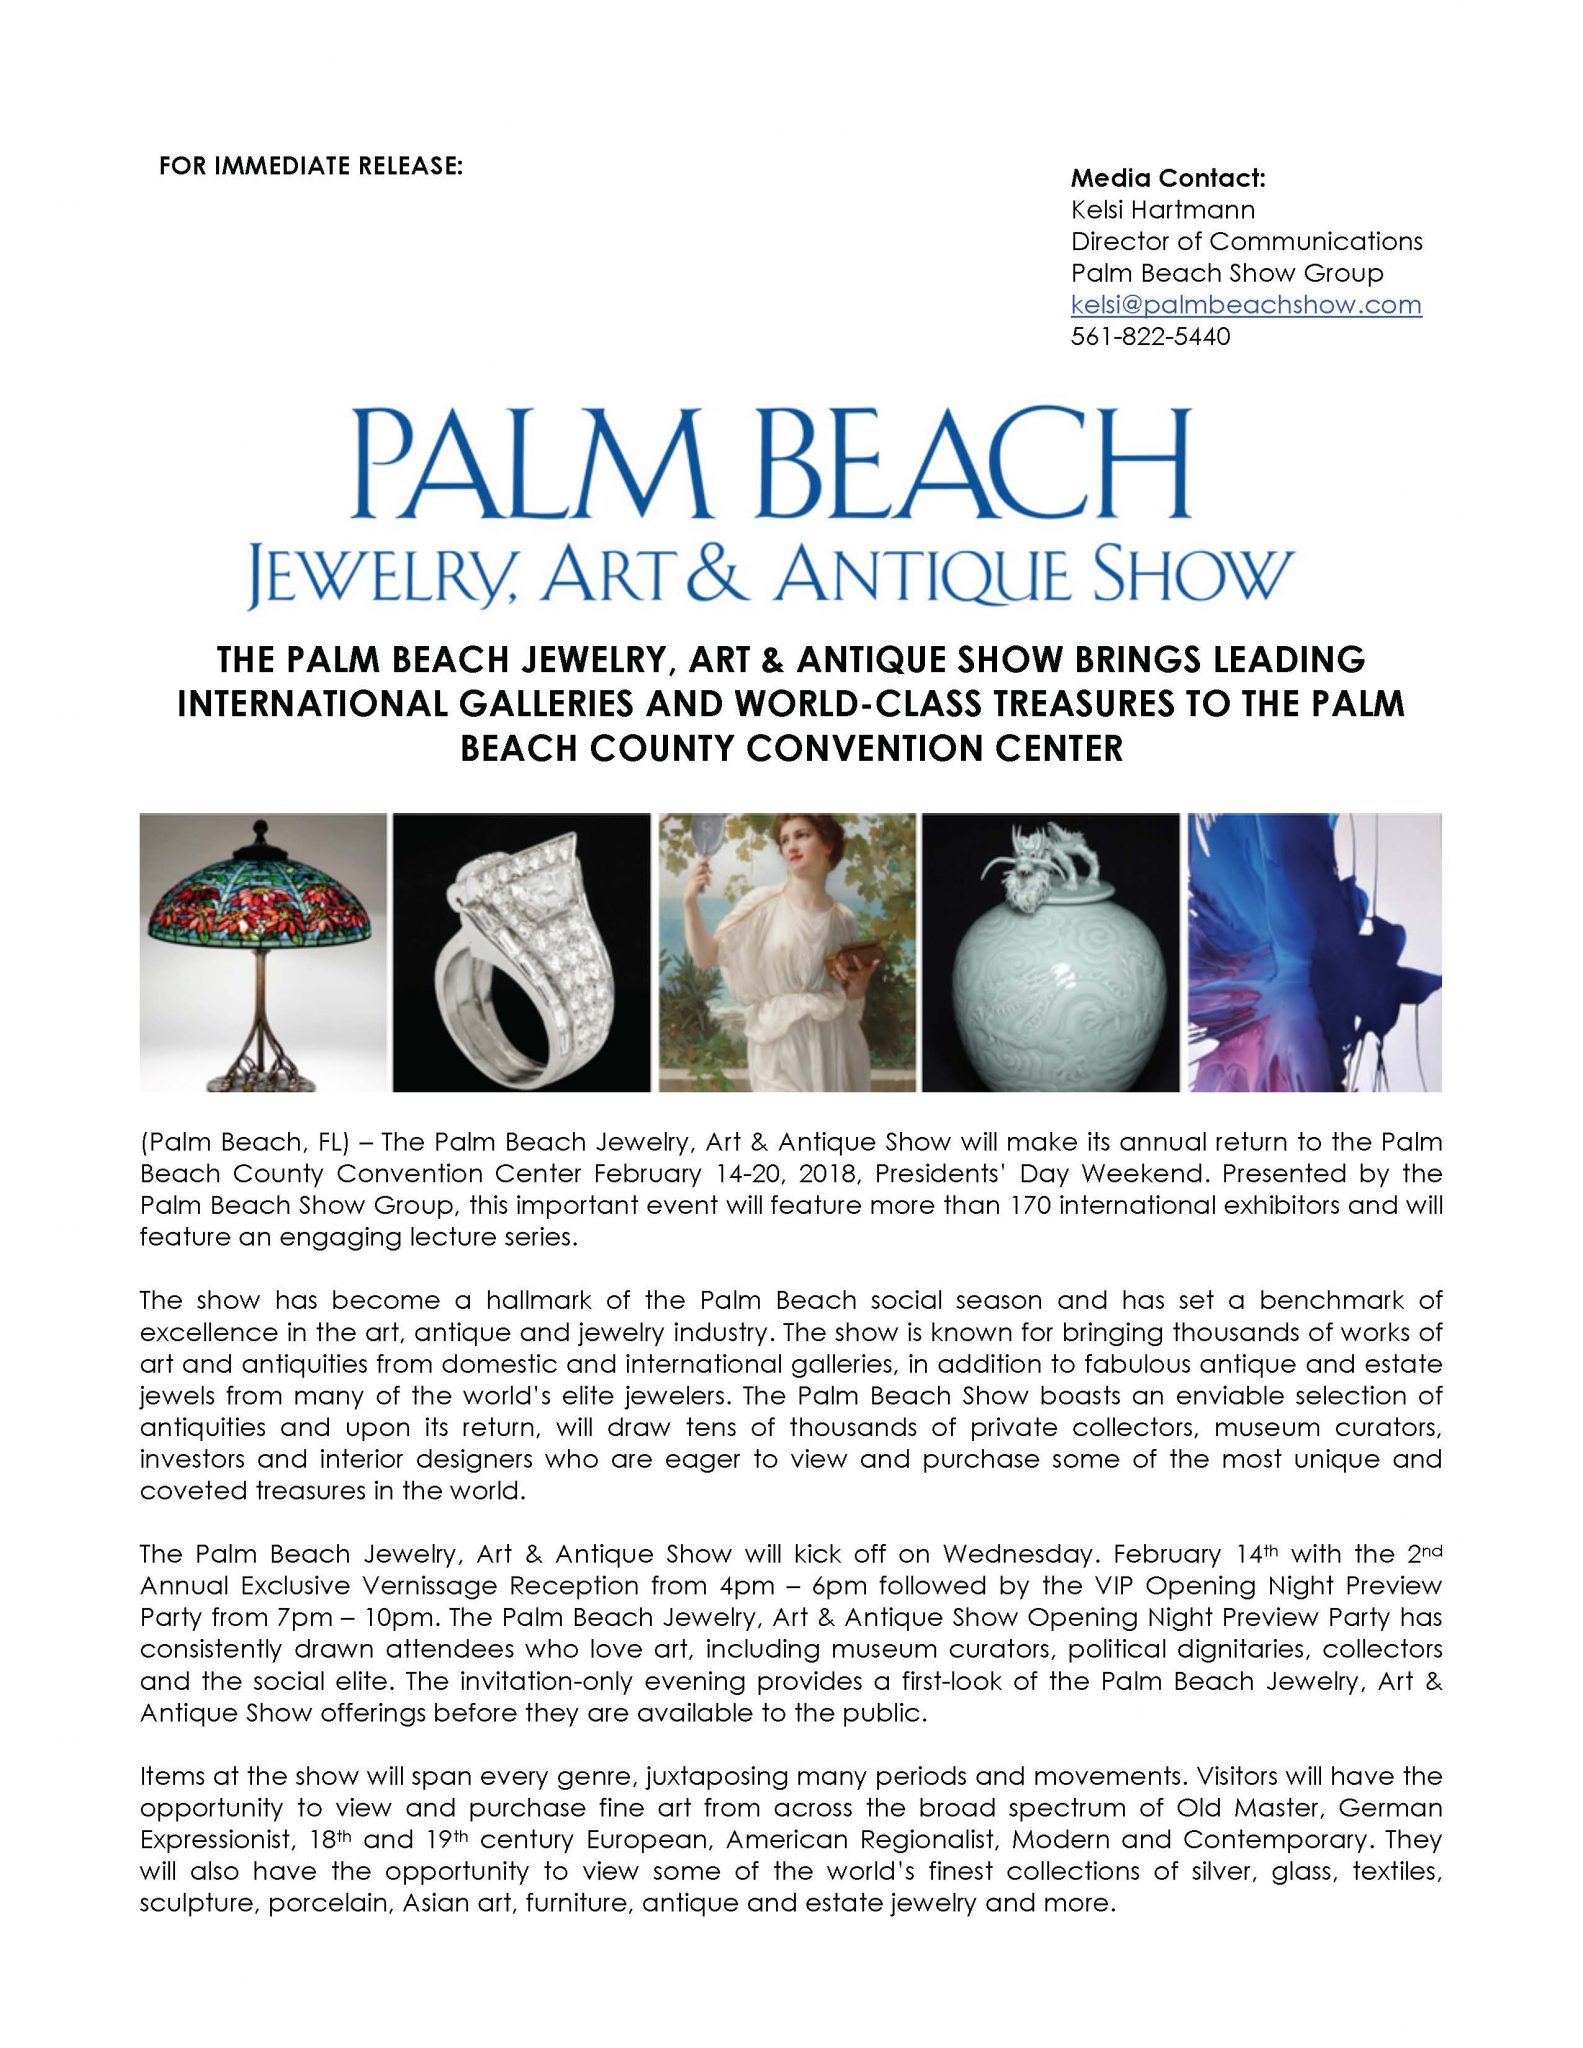 The Palm Beach Jewelry Art Antique Show Brings Leading